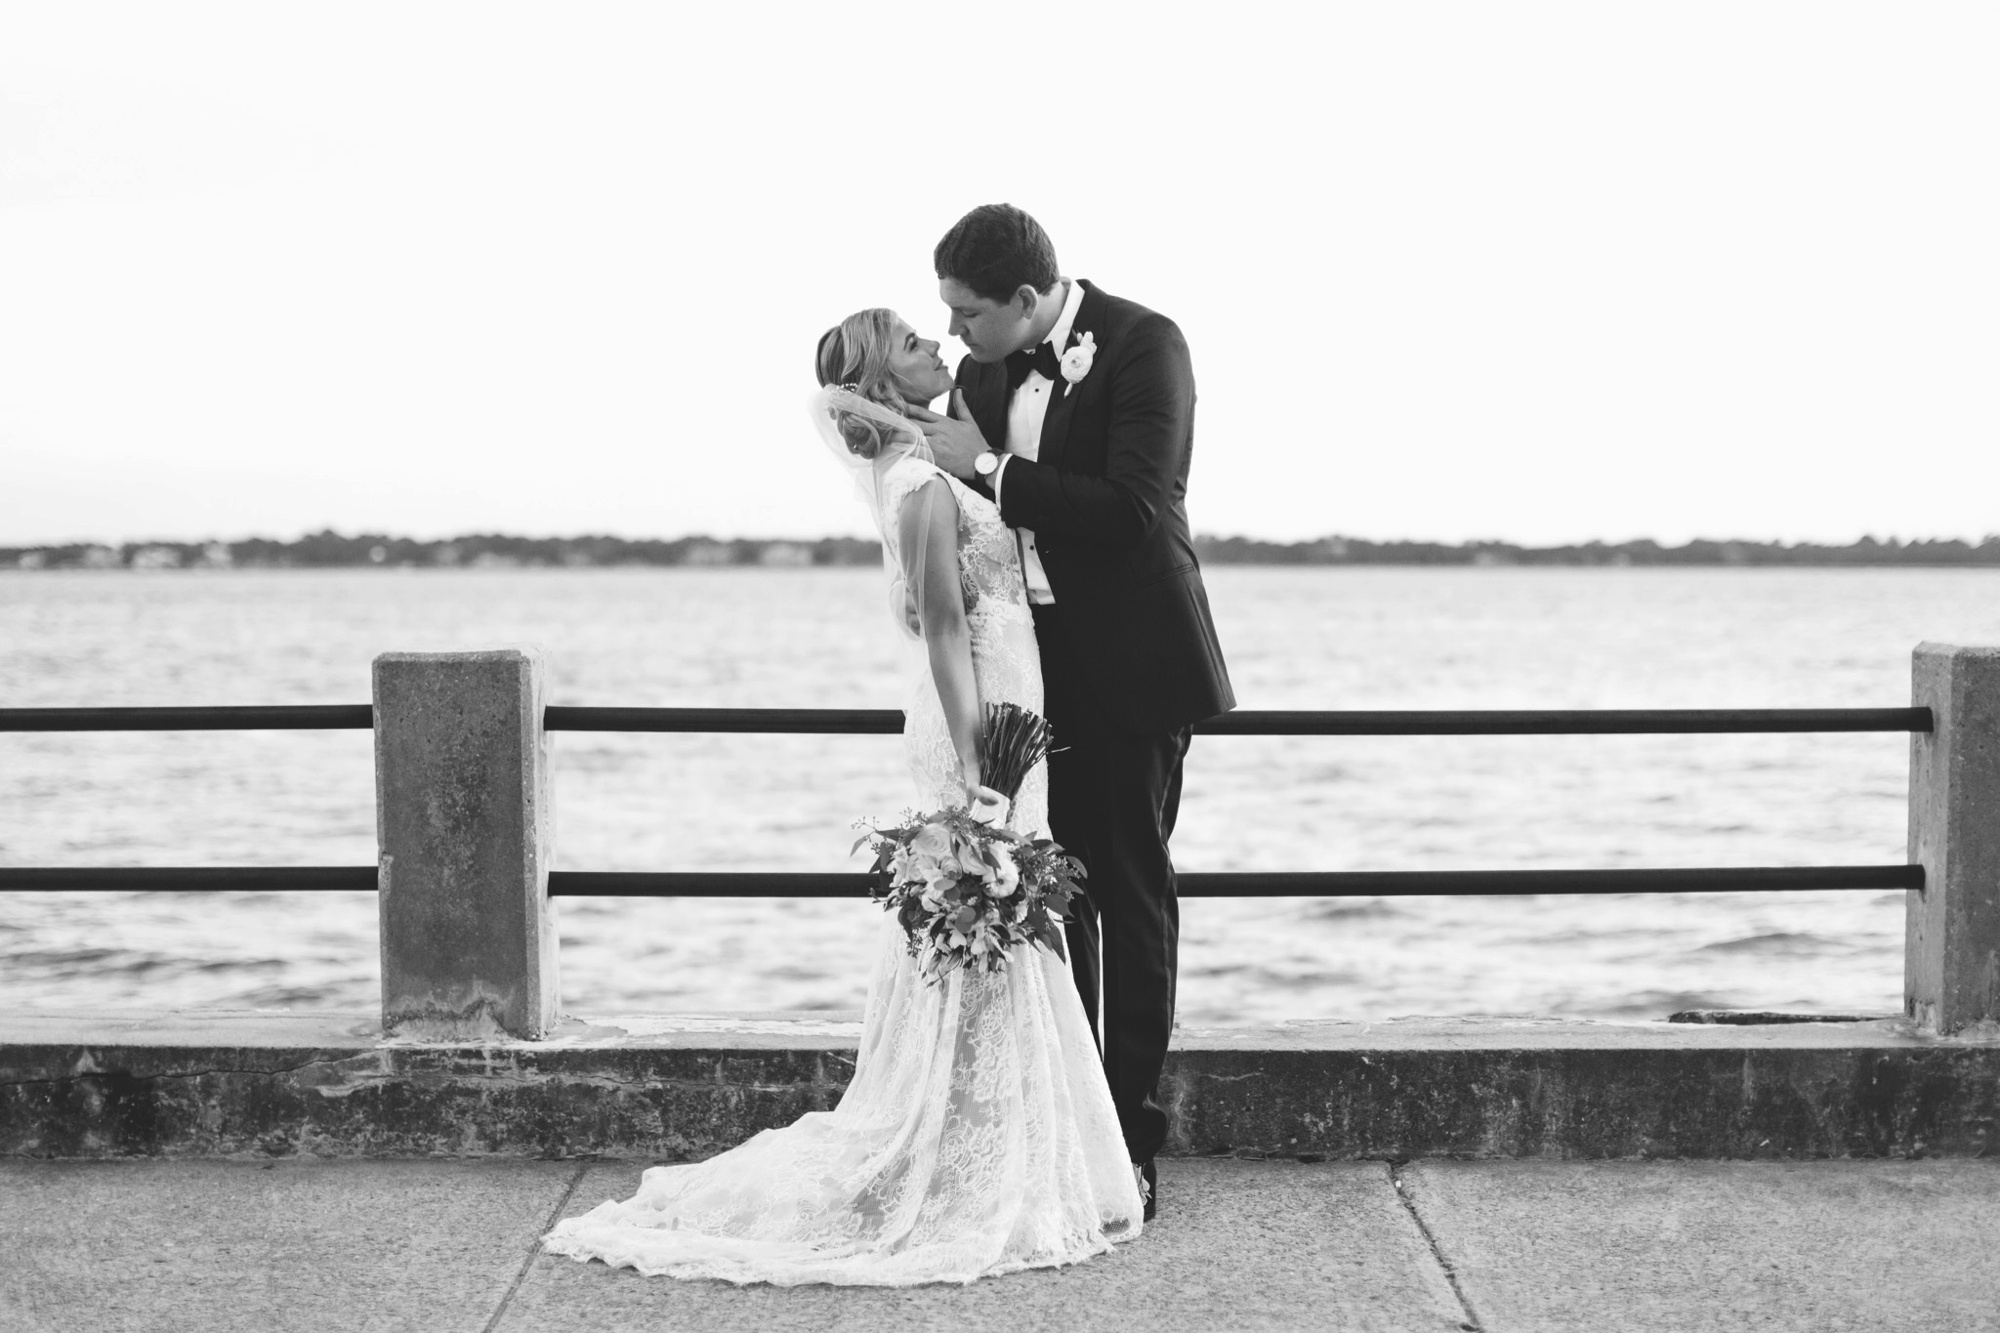 This bride and groom share an intimate moment as husband and wife along the water. Photo by destination photographer Rebecca Cerasani